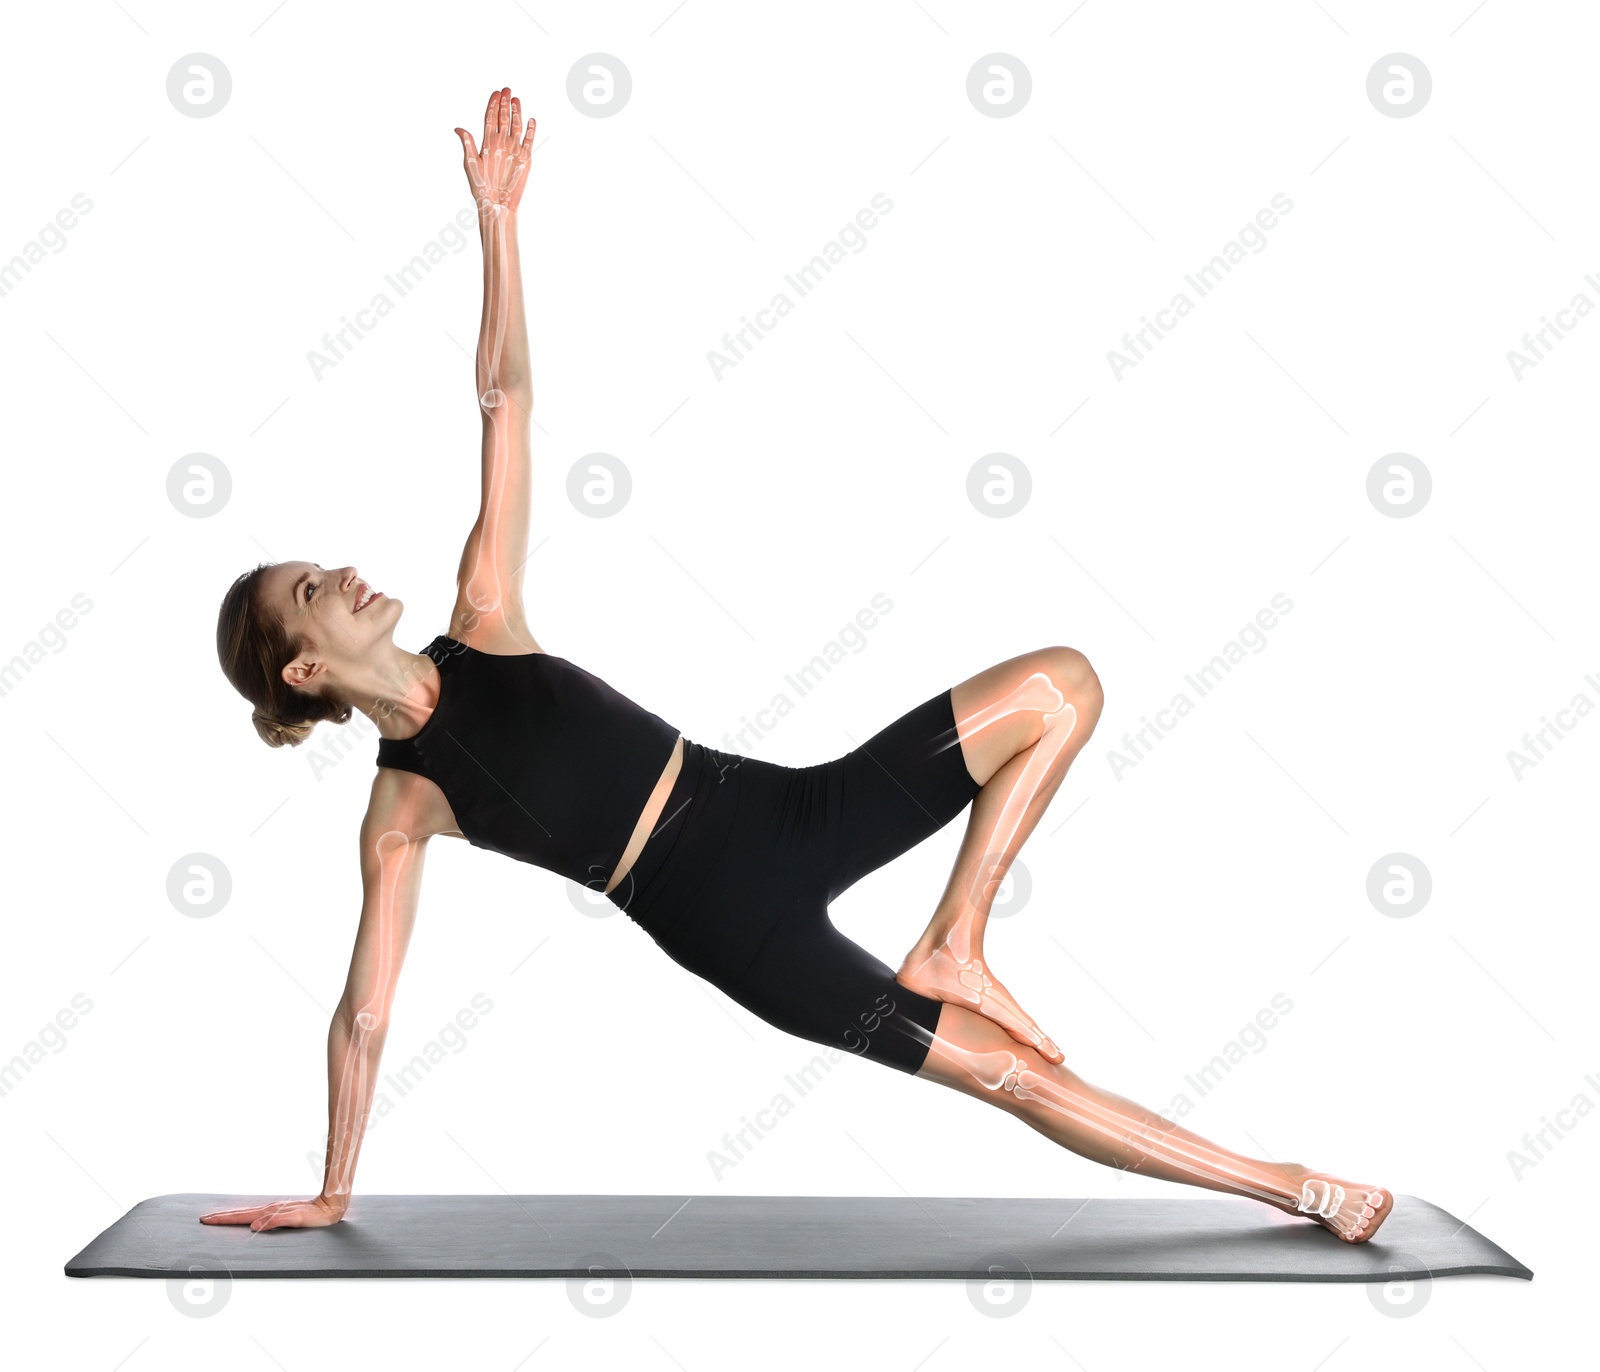 Image of Digital composite of highlighted bones and woman practicing yoga on white background